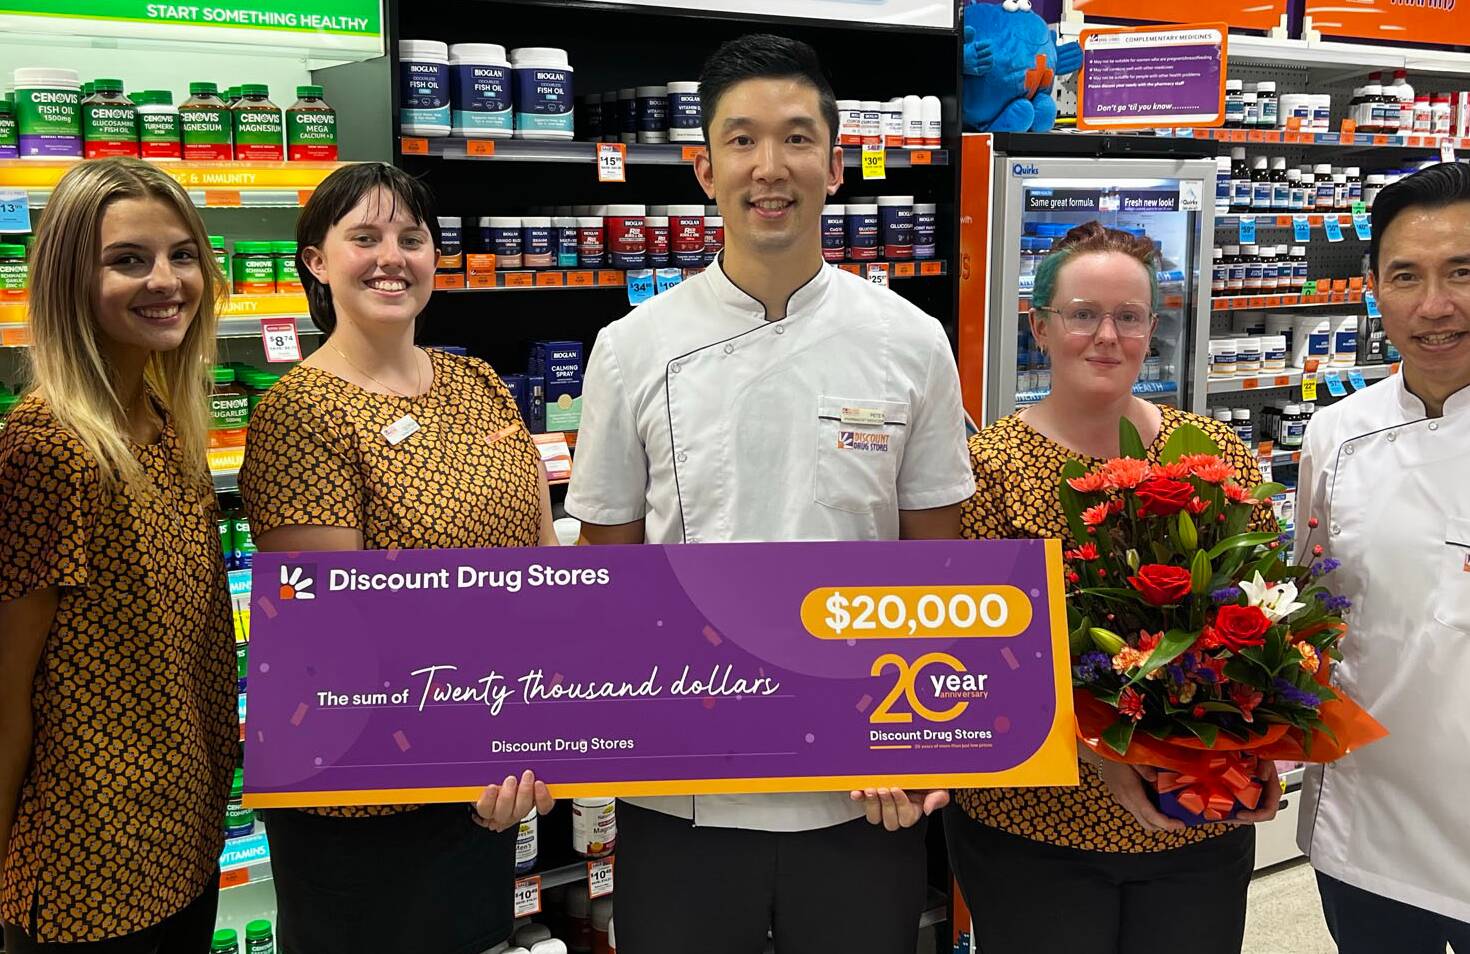 A tidy cash prize to mark 20 years in business for Discount Drug